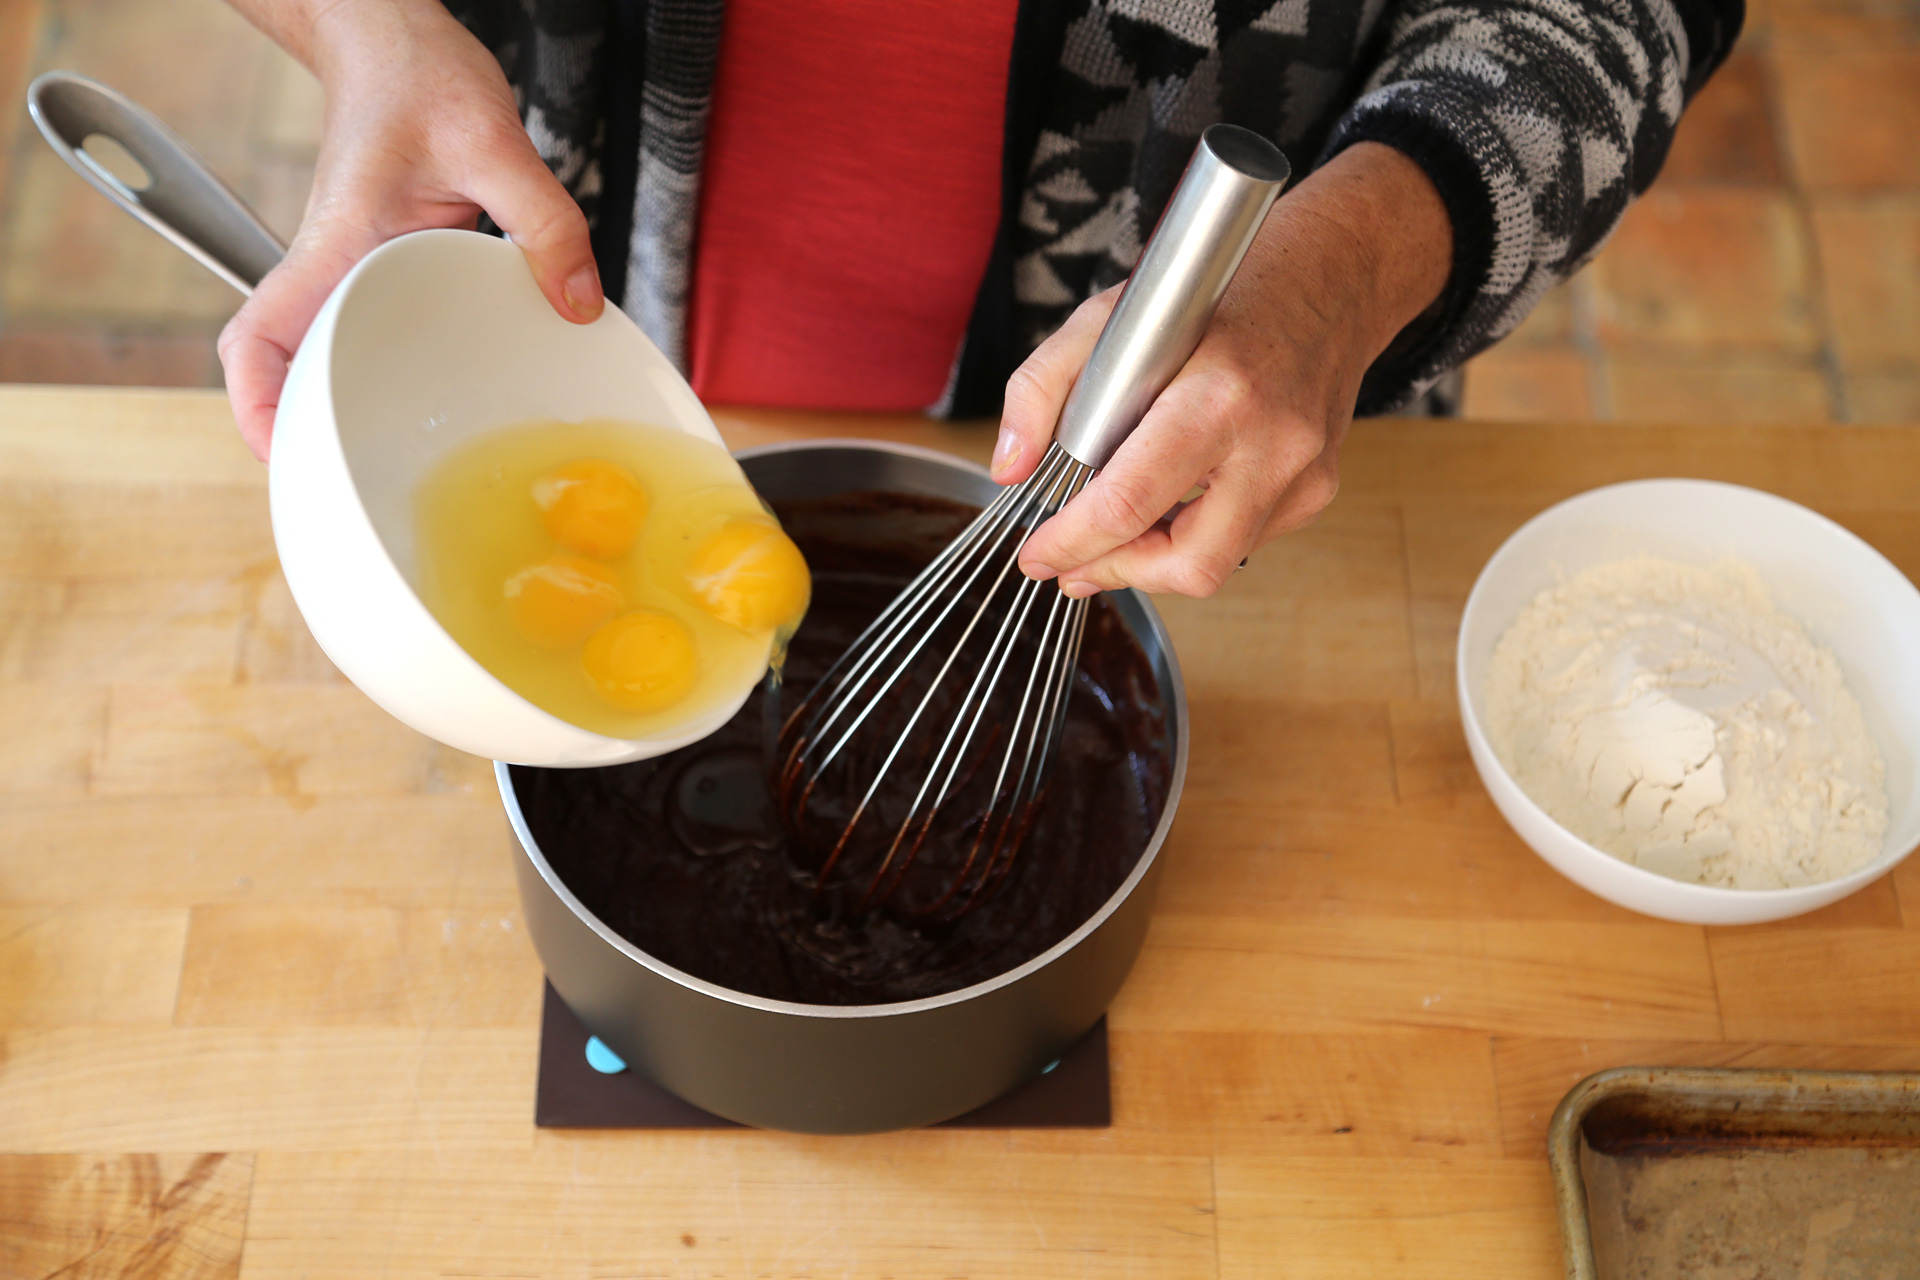 Add the eggs one at a time, whisking well after each addition.